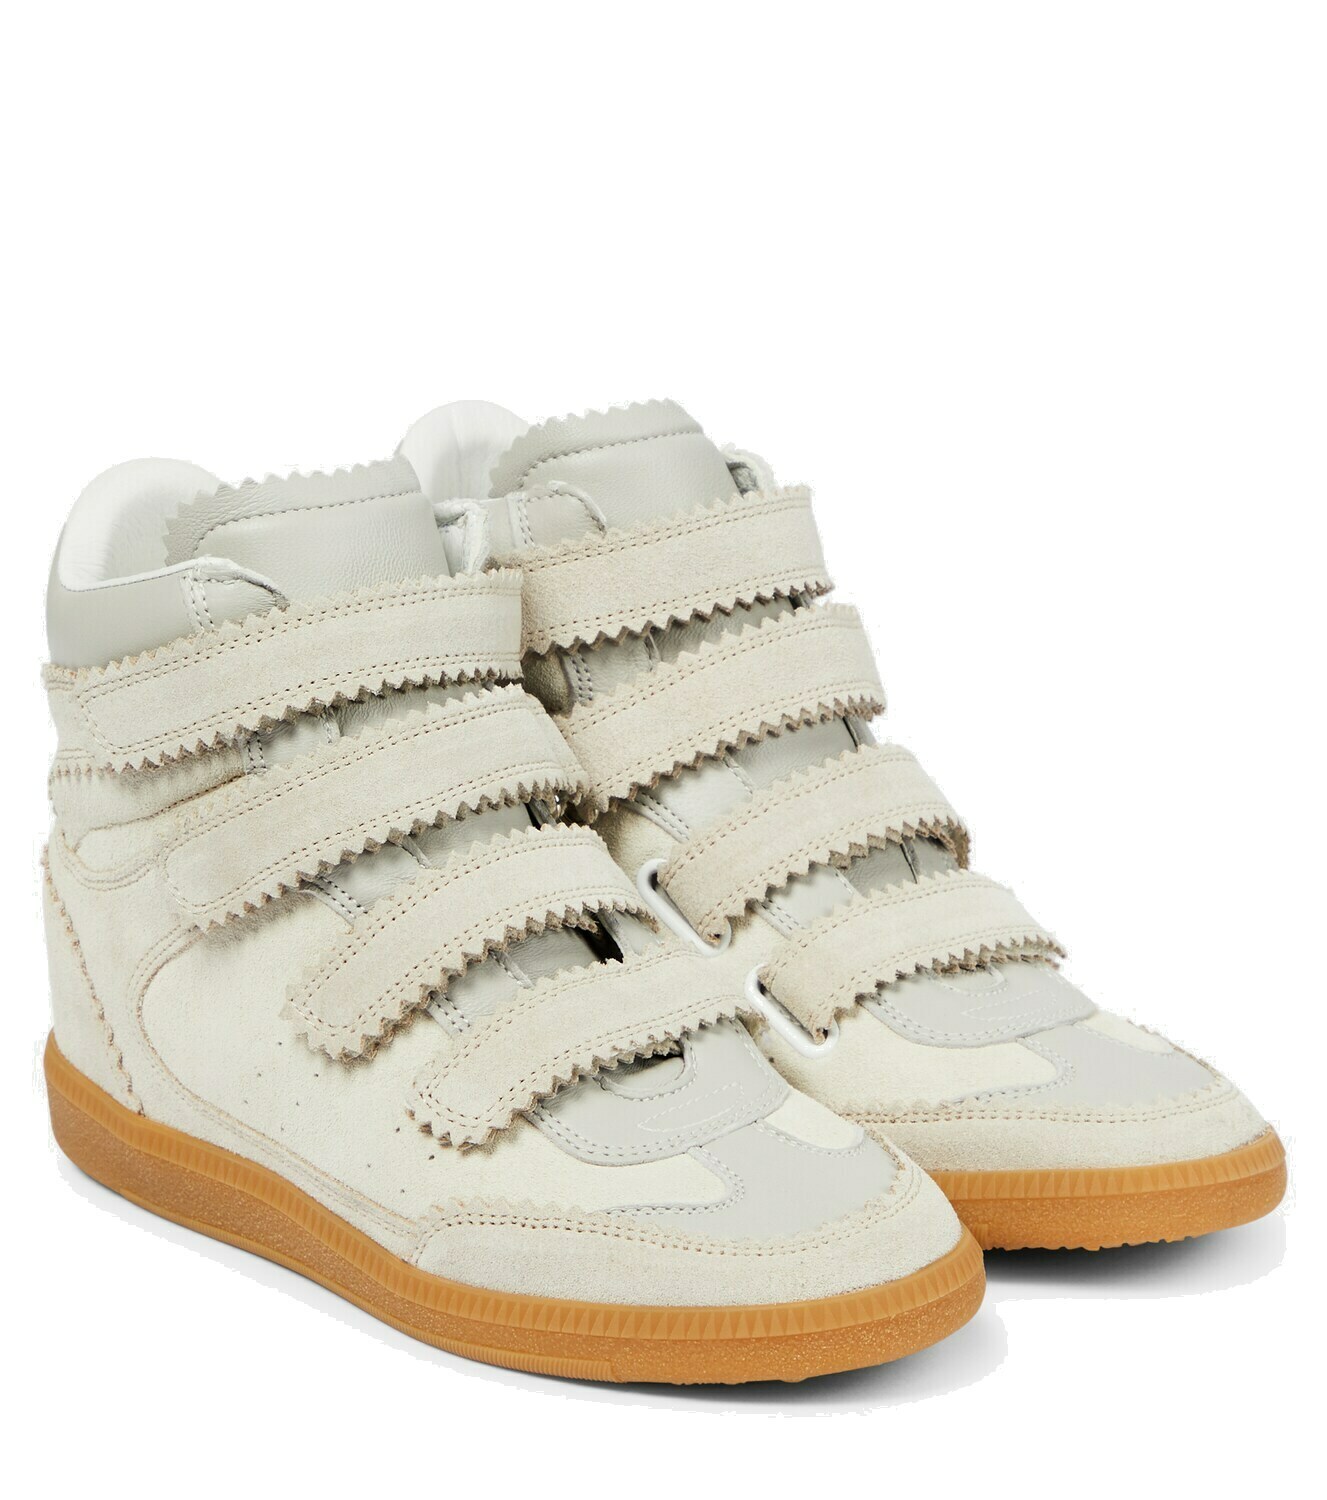 Isabel Marant - Bilsy suede high-top sneakers Isabel Marant